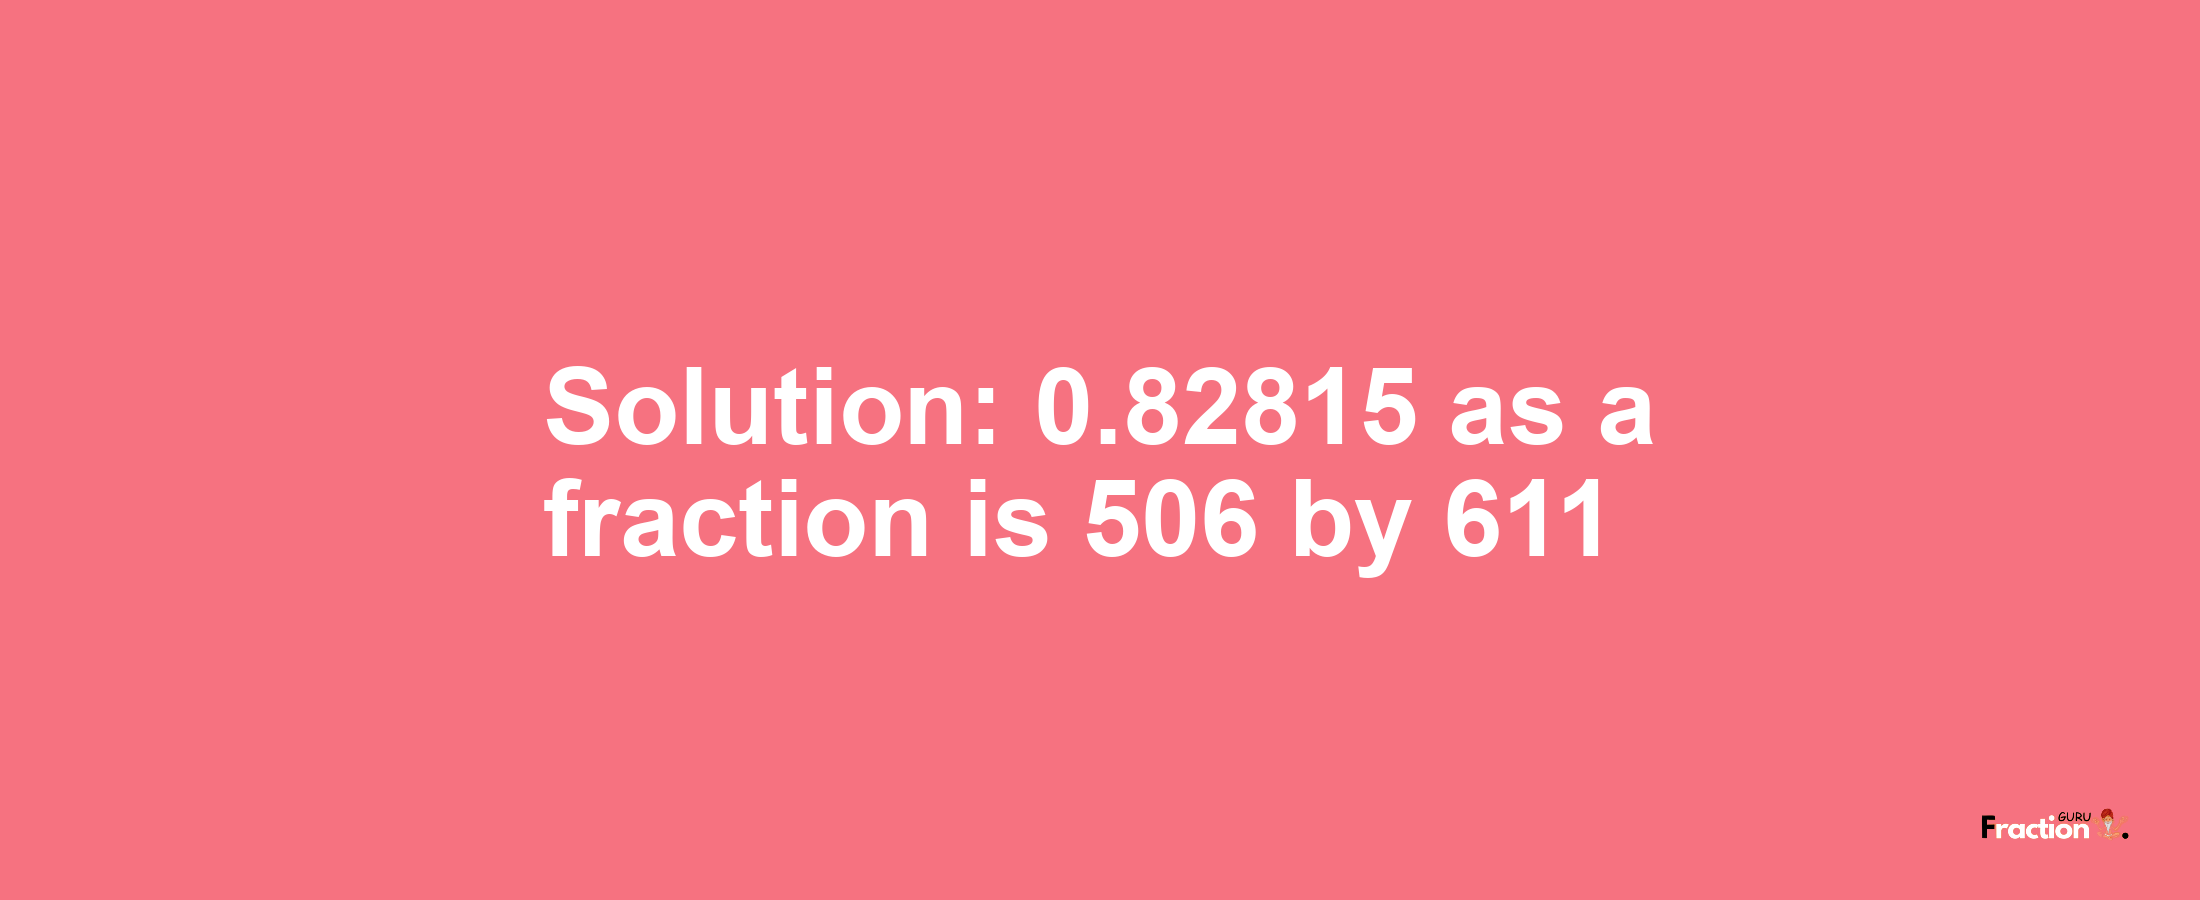 Solution:0.82815 as a fraction is 506/611